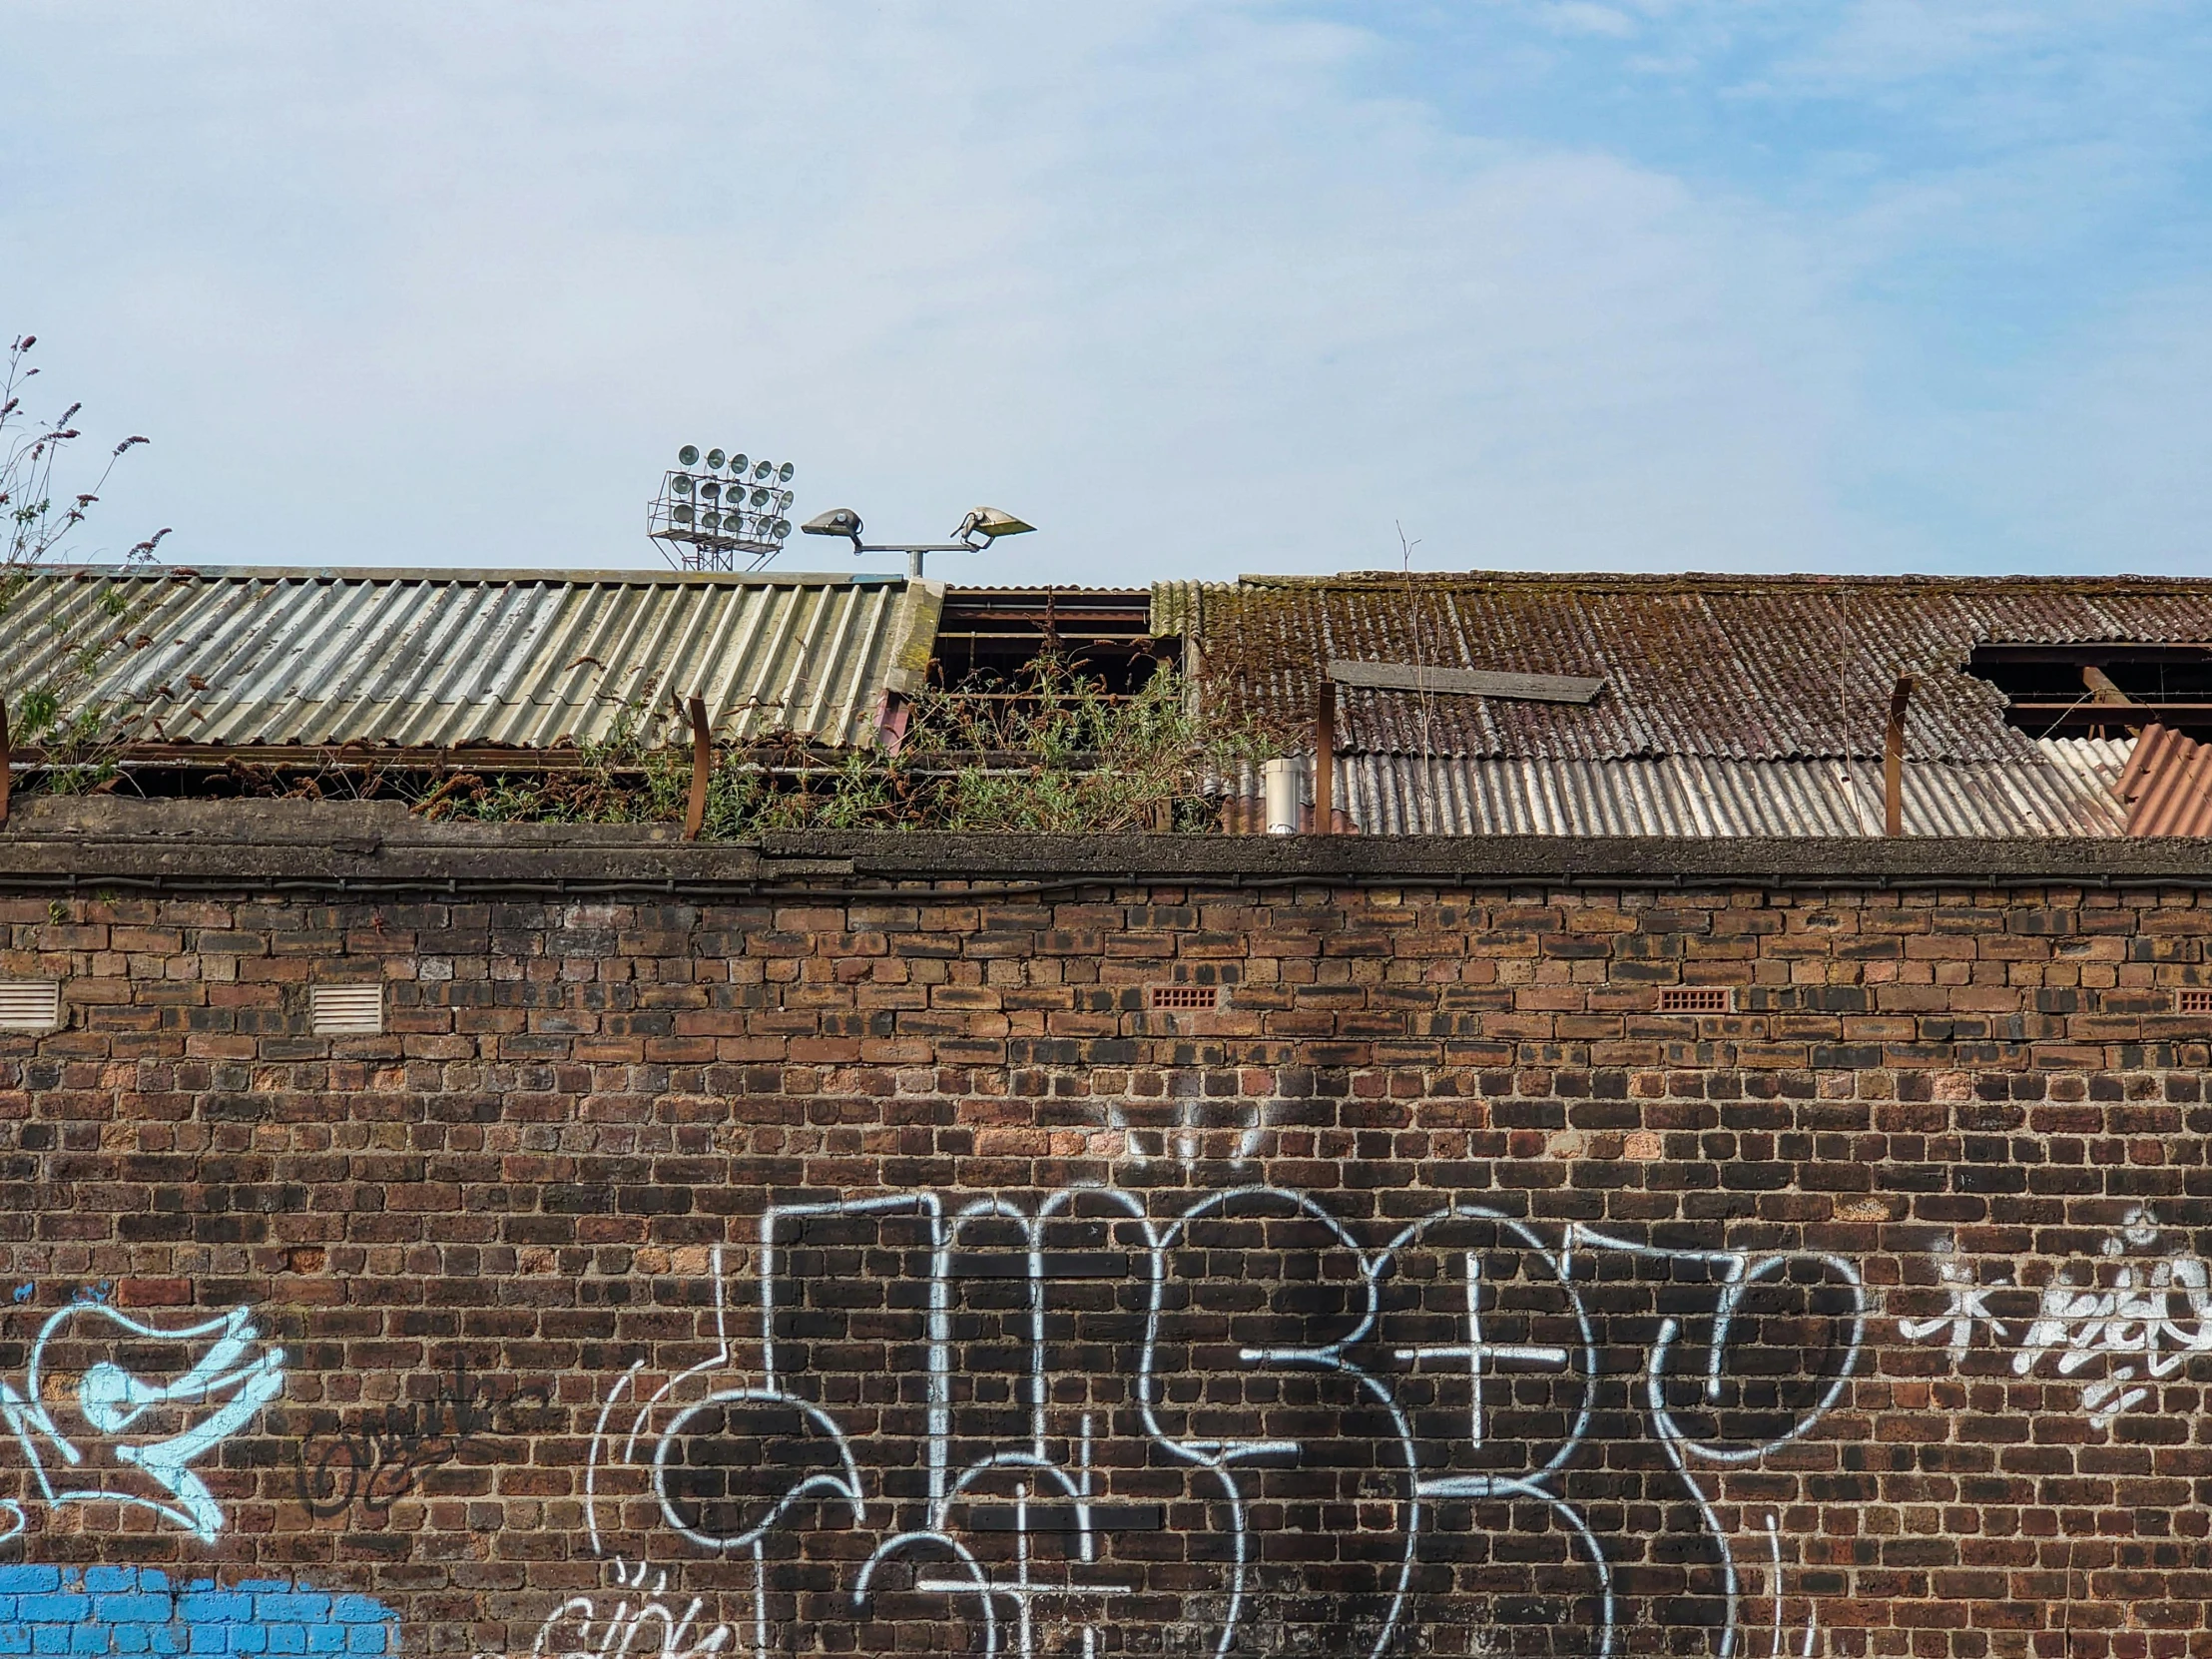 a fire hydrant in front of a brick wall with graffiti on it, inspired by Banksy, unsplash, graffiti, roof with vegetation, distant view, satellite dishes, panoramic shot